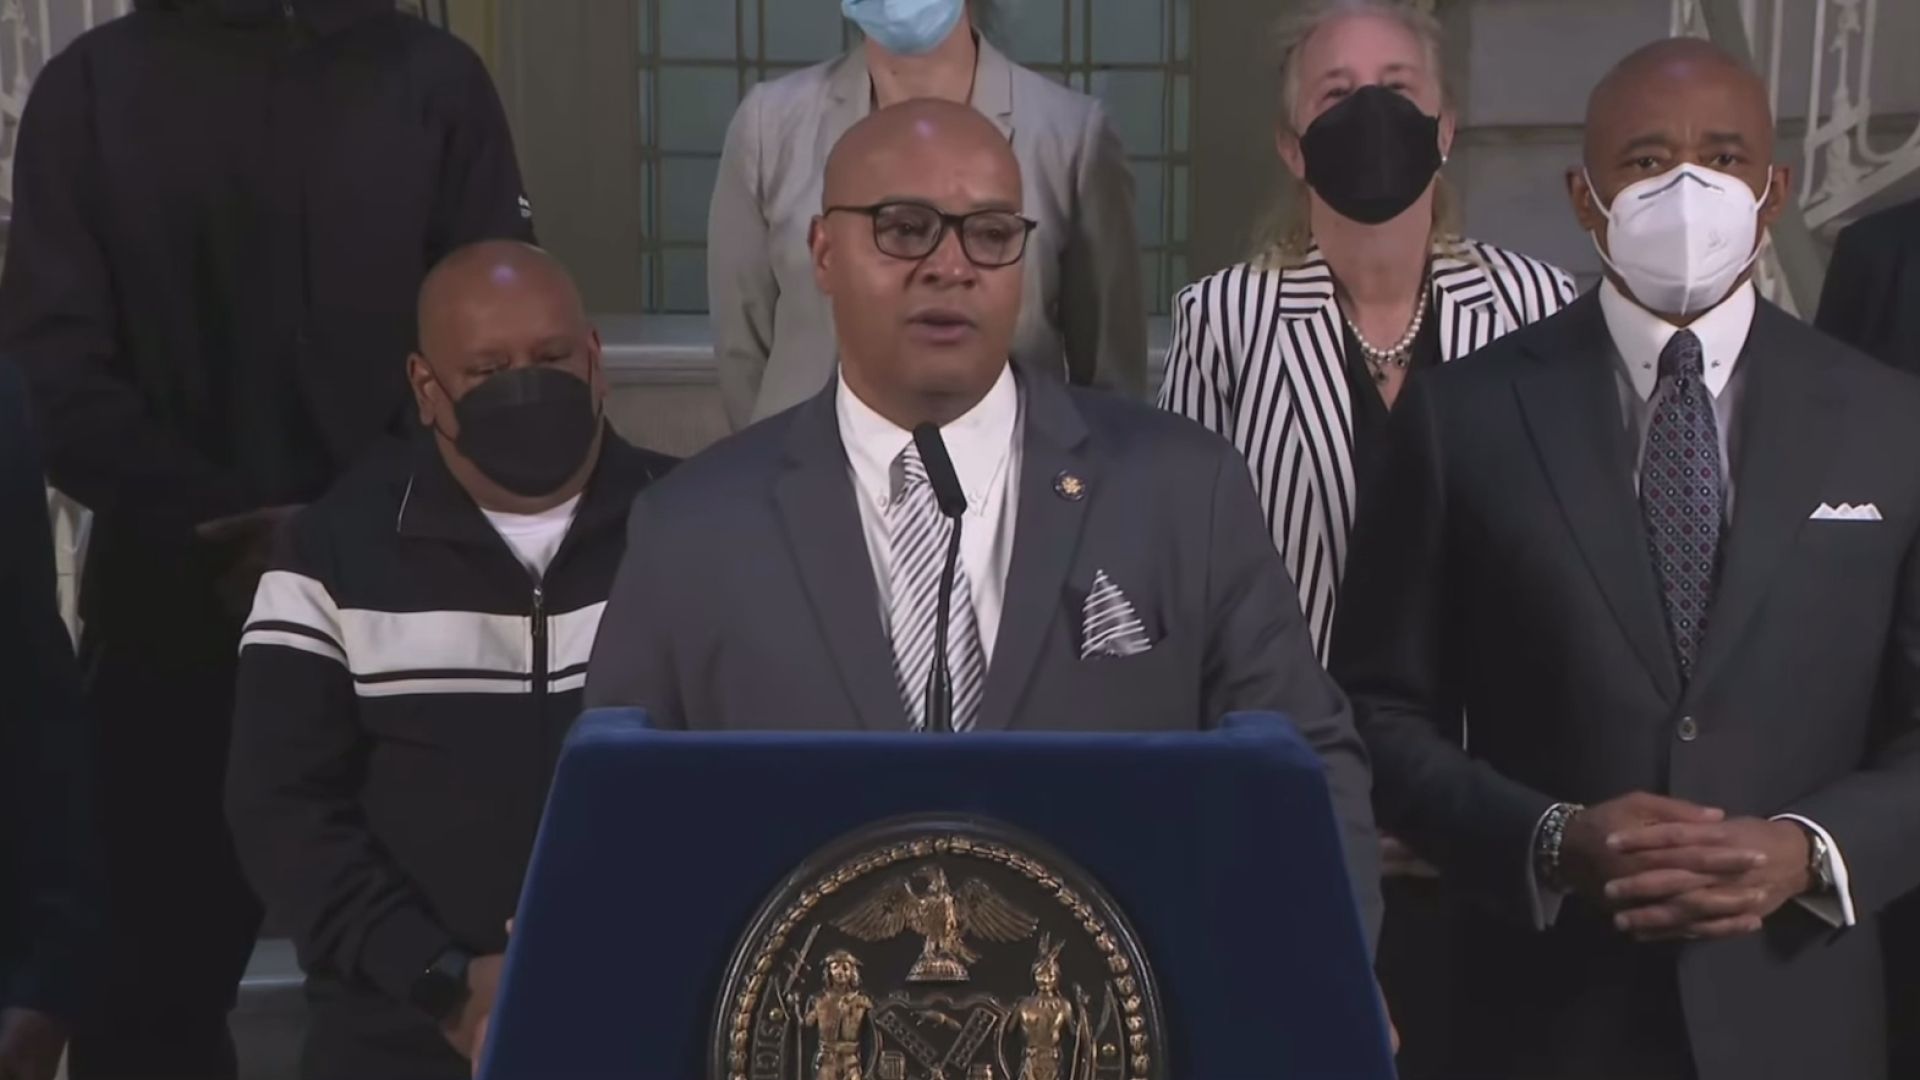 Remarks on City Investments for Unsheltered New Yorkers